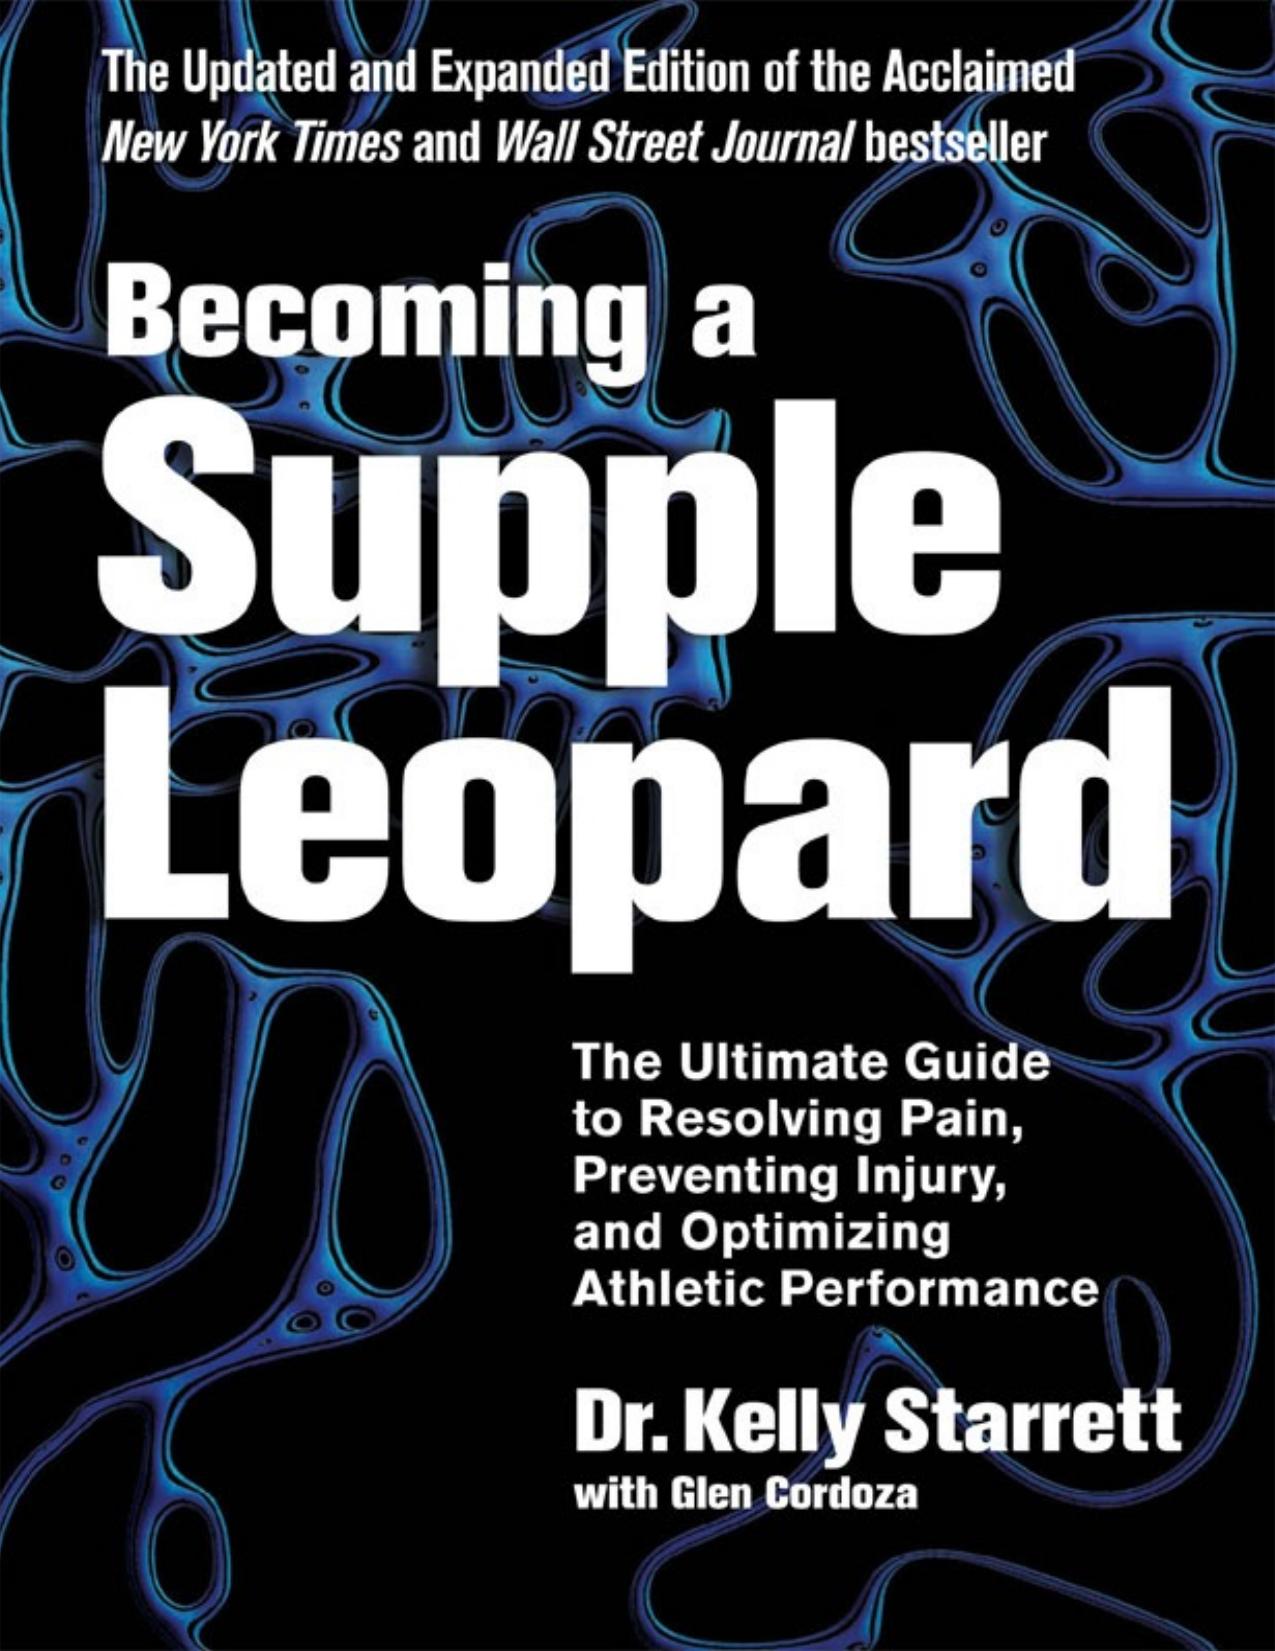 Becoming a Supple Leopard: The Ultimate Guide to Resolving Pain, Preventing Injury, and Optimizing Athletic Performance - PDFDrive.com